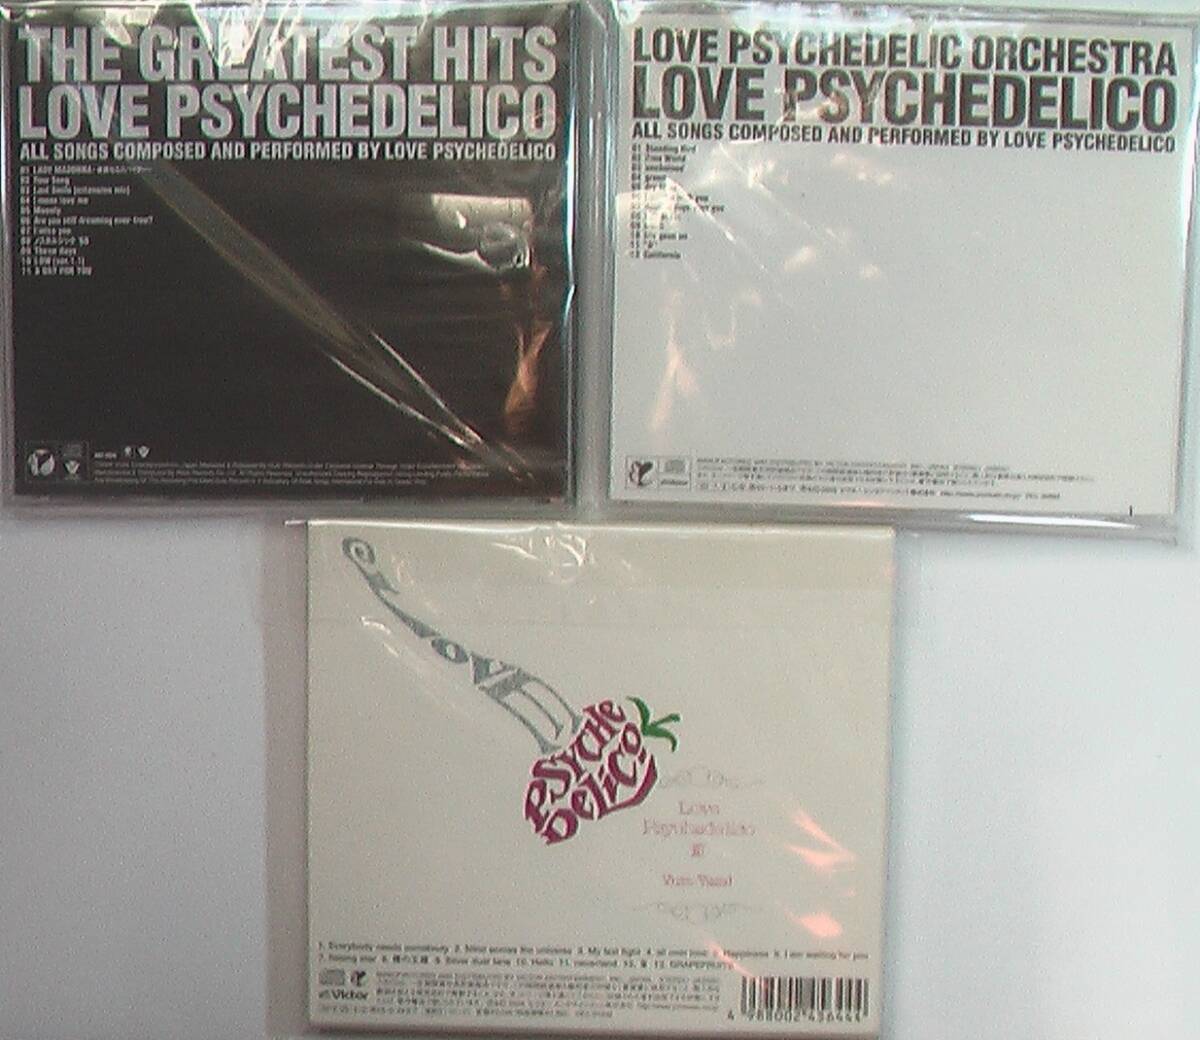 CD3枚まとめて◆ラブサイケデリコ アルバム セット★送料185円！The Greatest Hits＋LOVE PSYCHEDELIC ORCHESTRA＋LOVE PSYCHEDELICO III_画像2